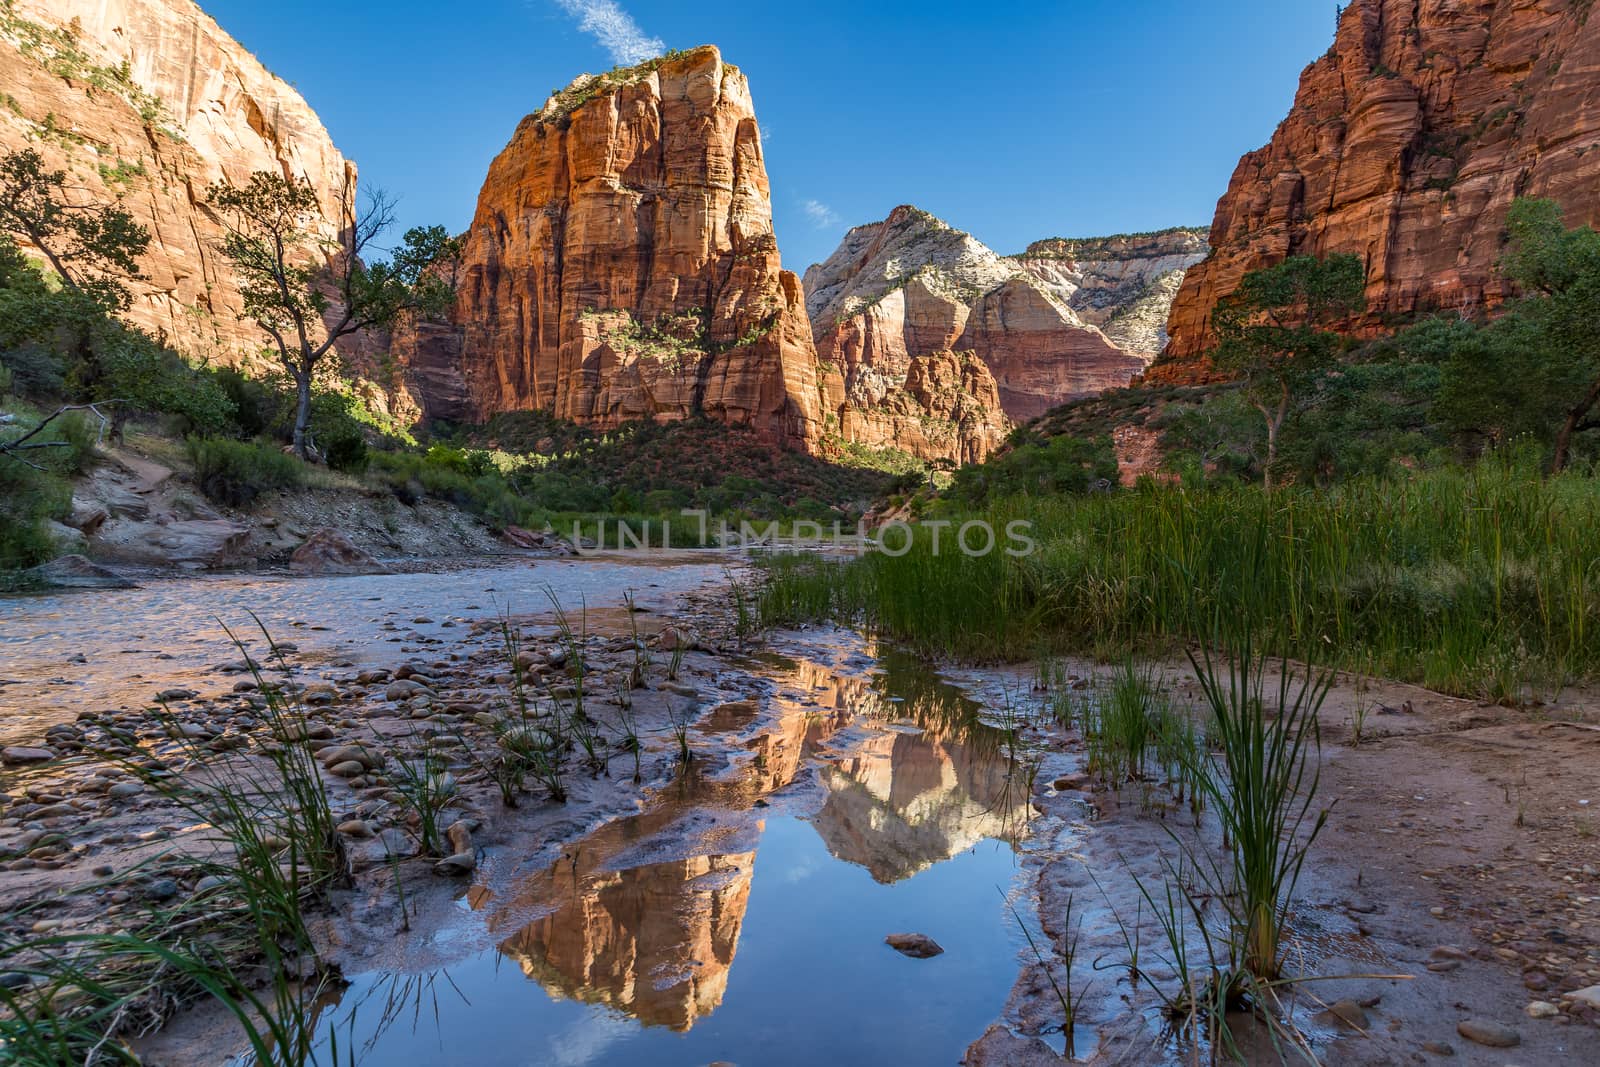 The Virgin River winds through the floor of Refrigerator Canyon at Zion National Park in Utah